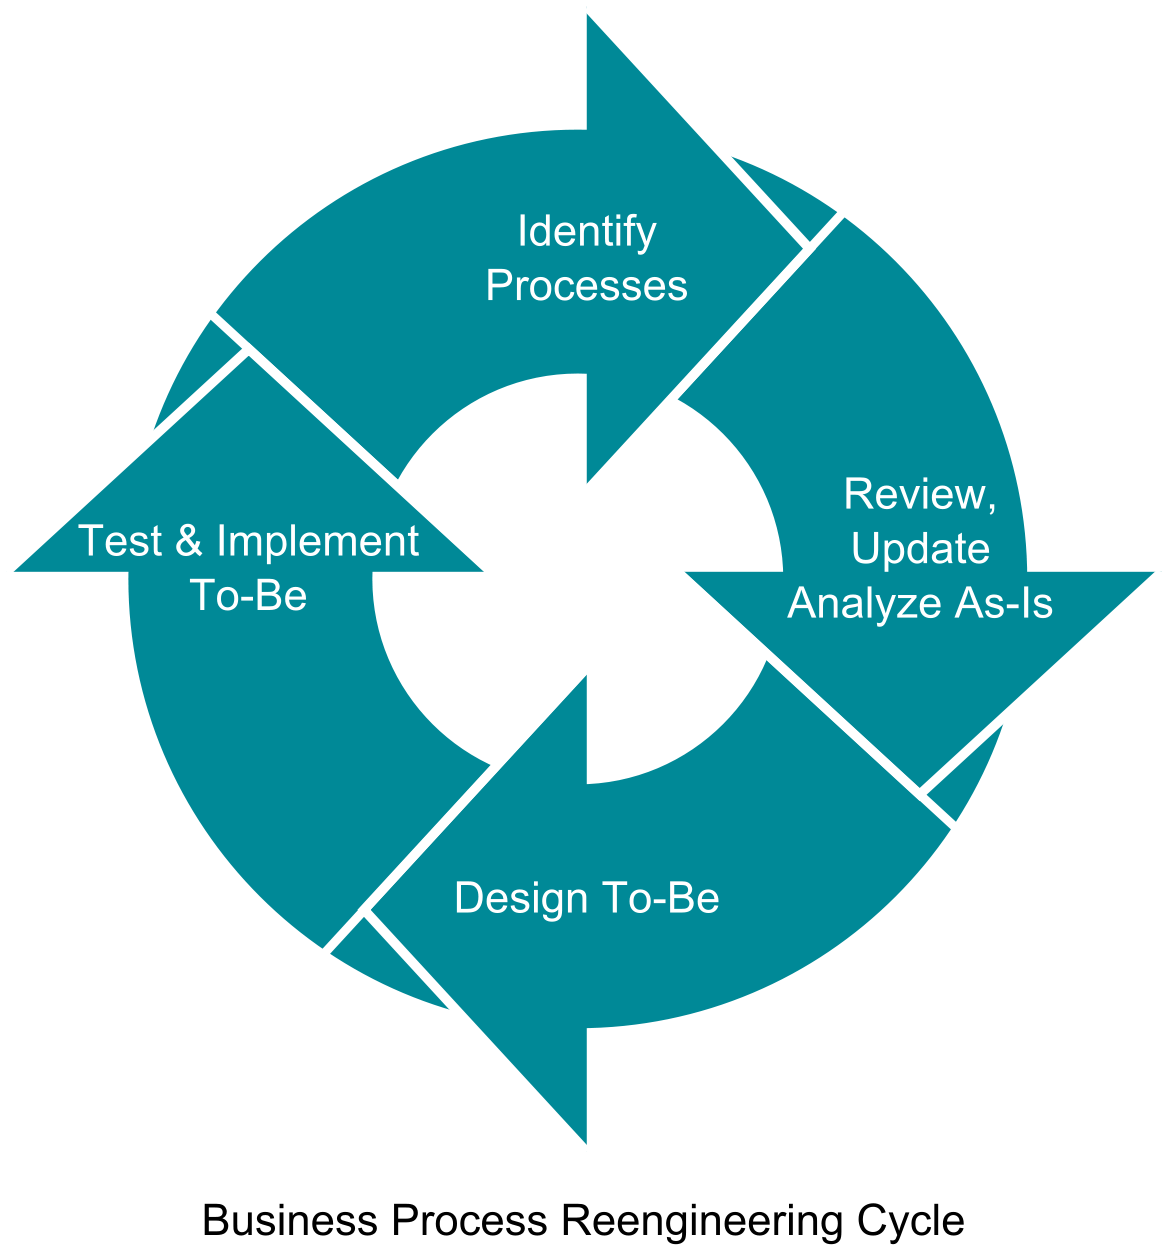 Bpr Iact Global - Business Process Re Engineering Cycle (1200x1267)